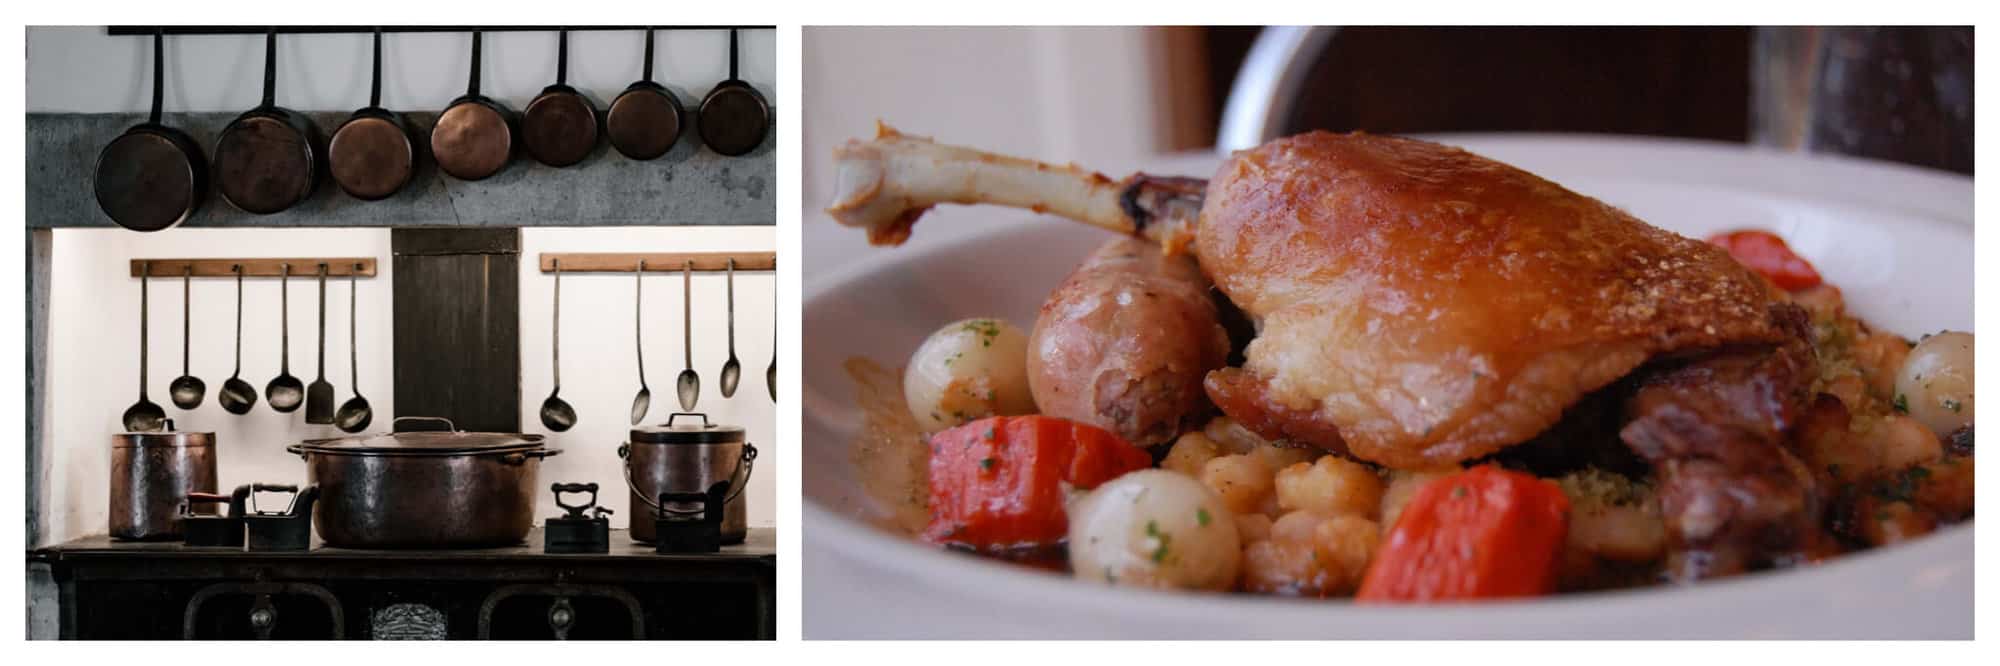 left: a traditional kitchen table with many copper pots, pans and ladles hung up. right: cassoulet dish made of chicken, sausage and vegetables on a white plate.